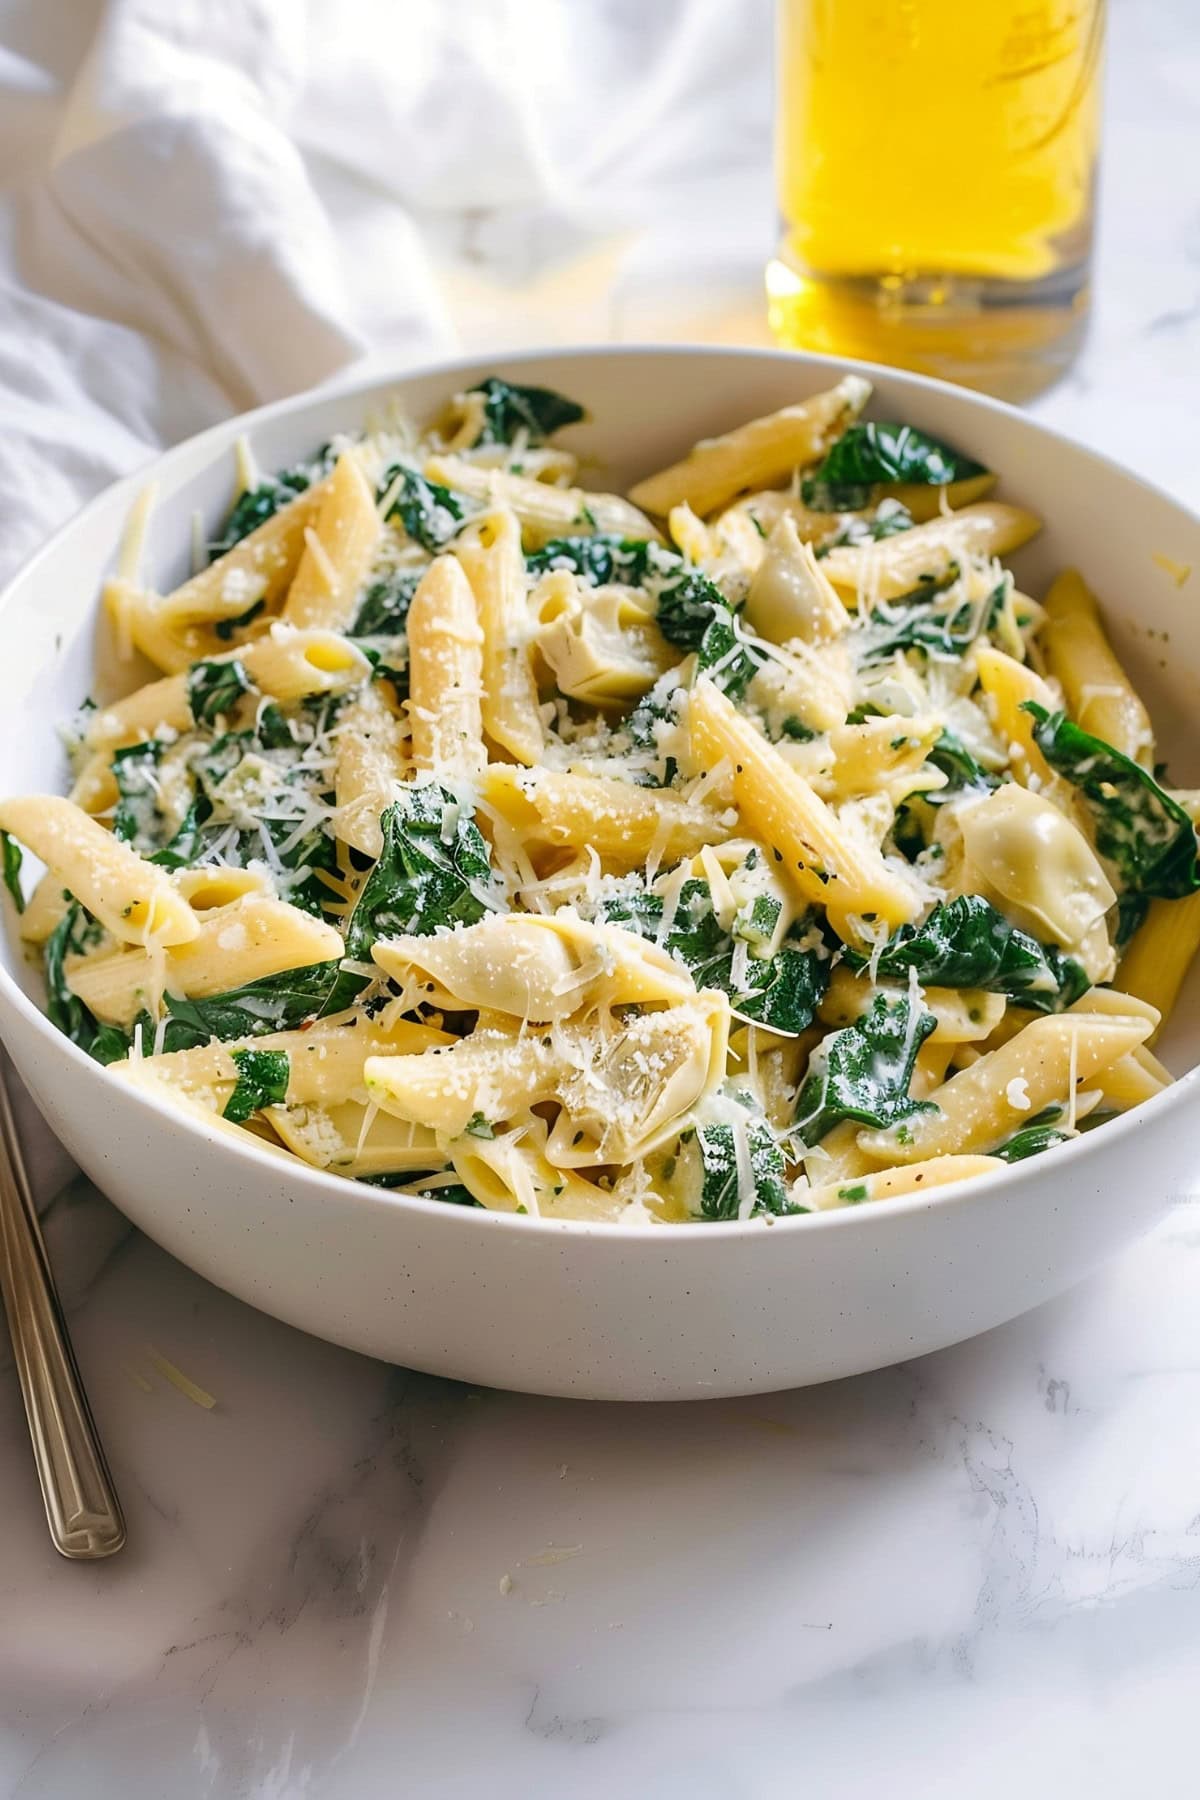 Spinach artichoke pasta in a bowl with parmesan cheese